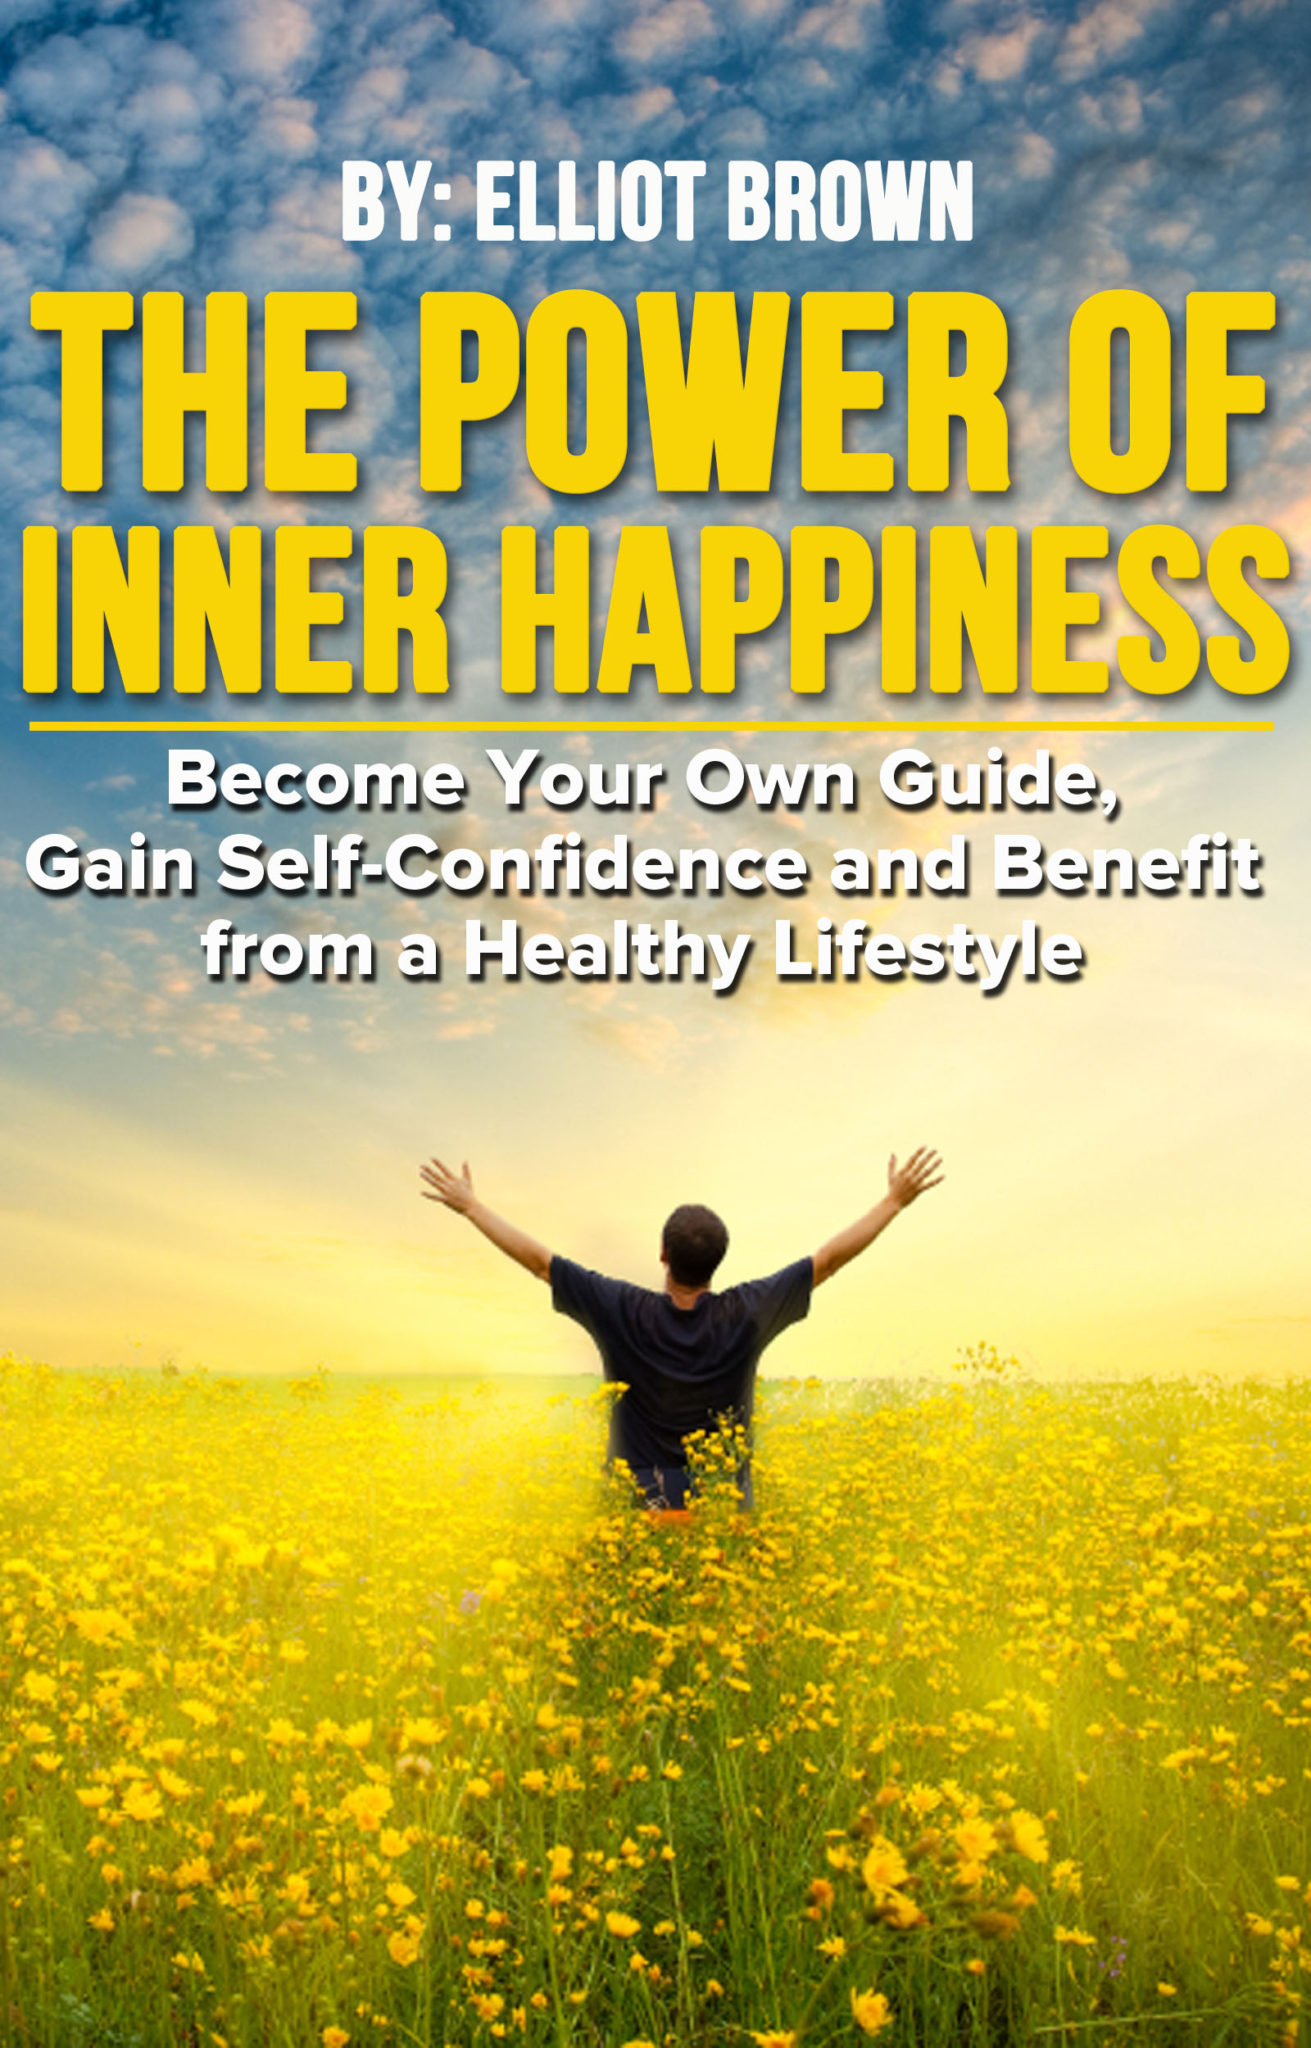 The Power of Inner Happiness: Become Your Own Guide. Gain Self Confidence and Benefit from a Healthy Lifestyle by Elliot Brown